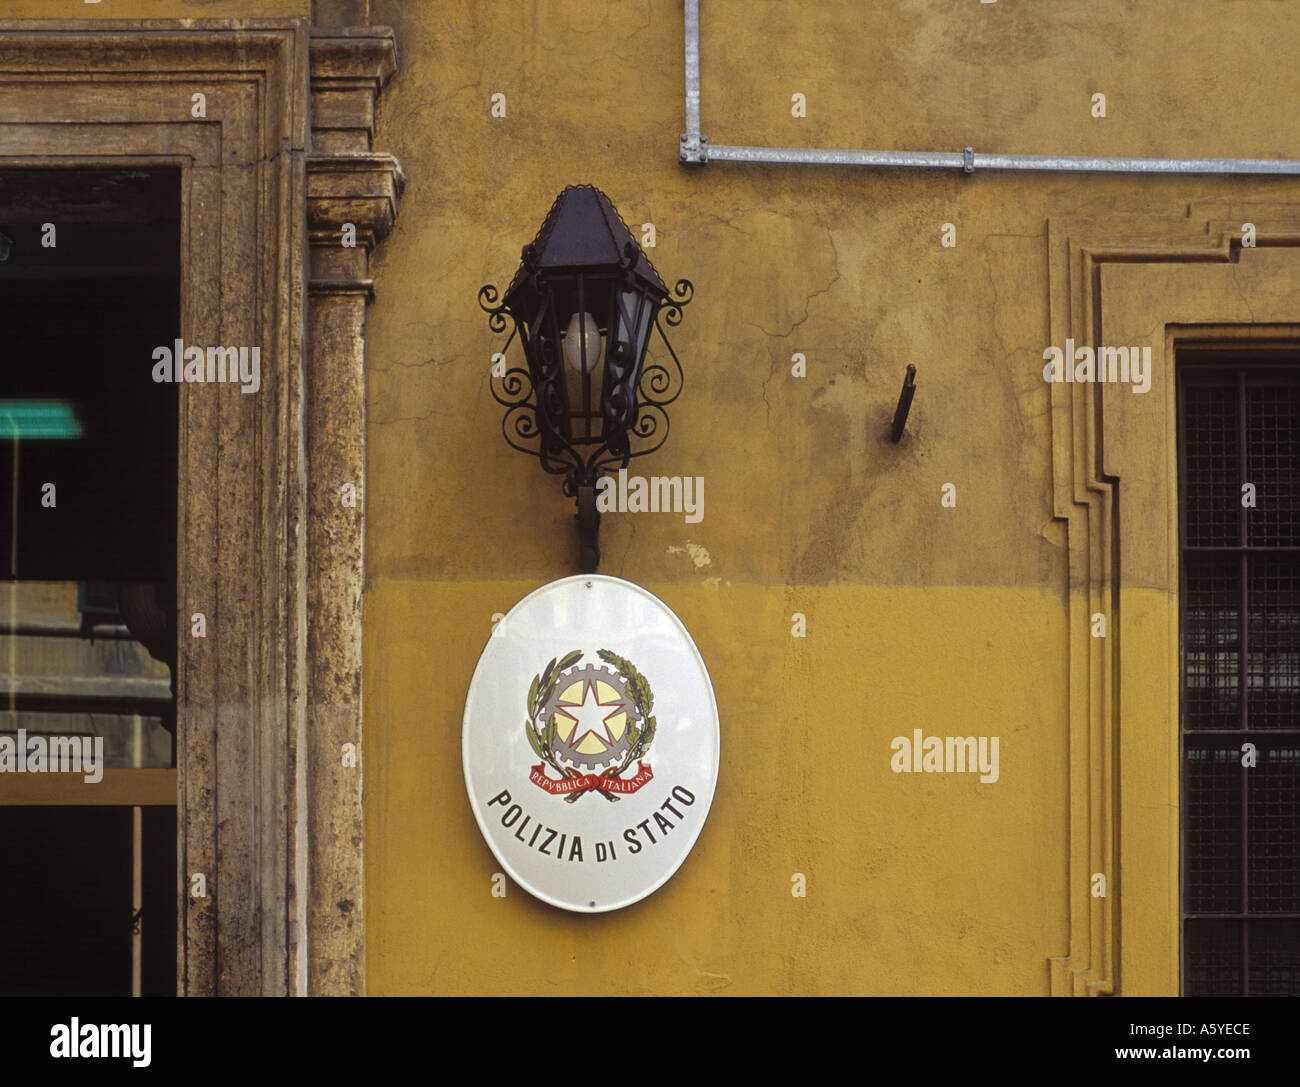 Police station sign in Rome Italy Stock Photo